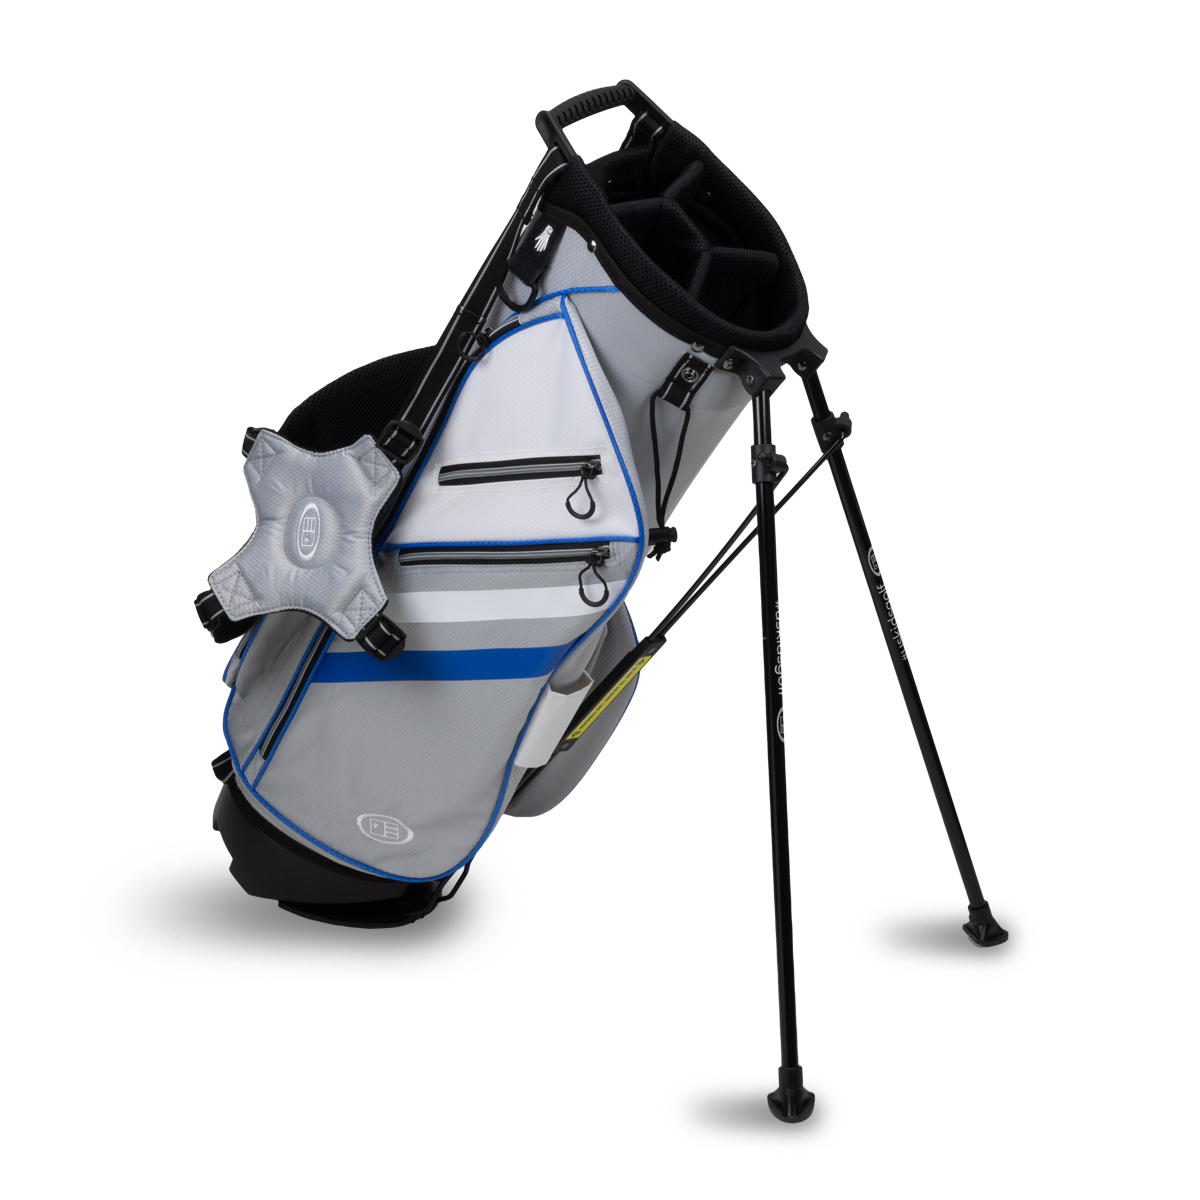 TS5-66  Stand Bag  34 inch, Silver/White Bag